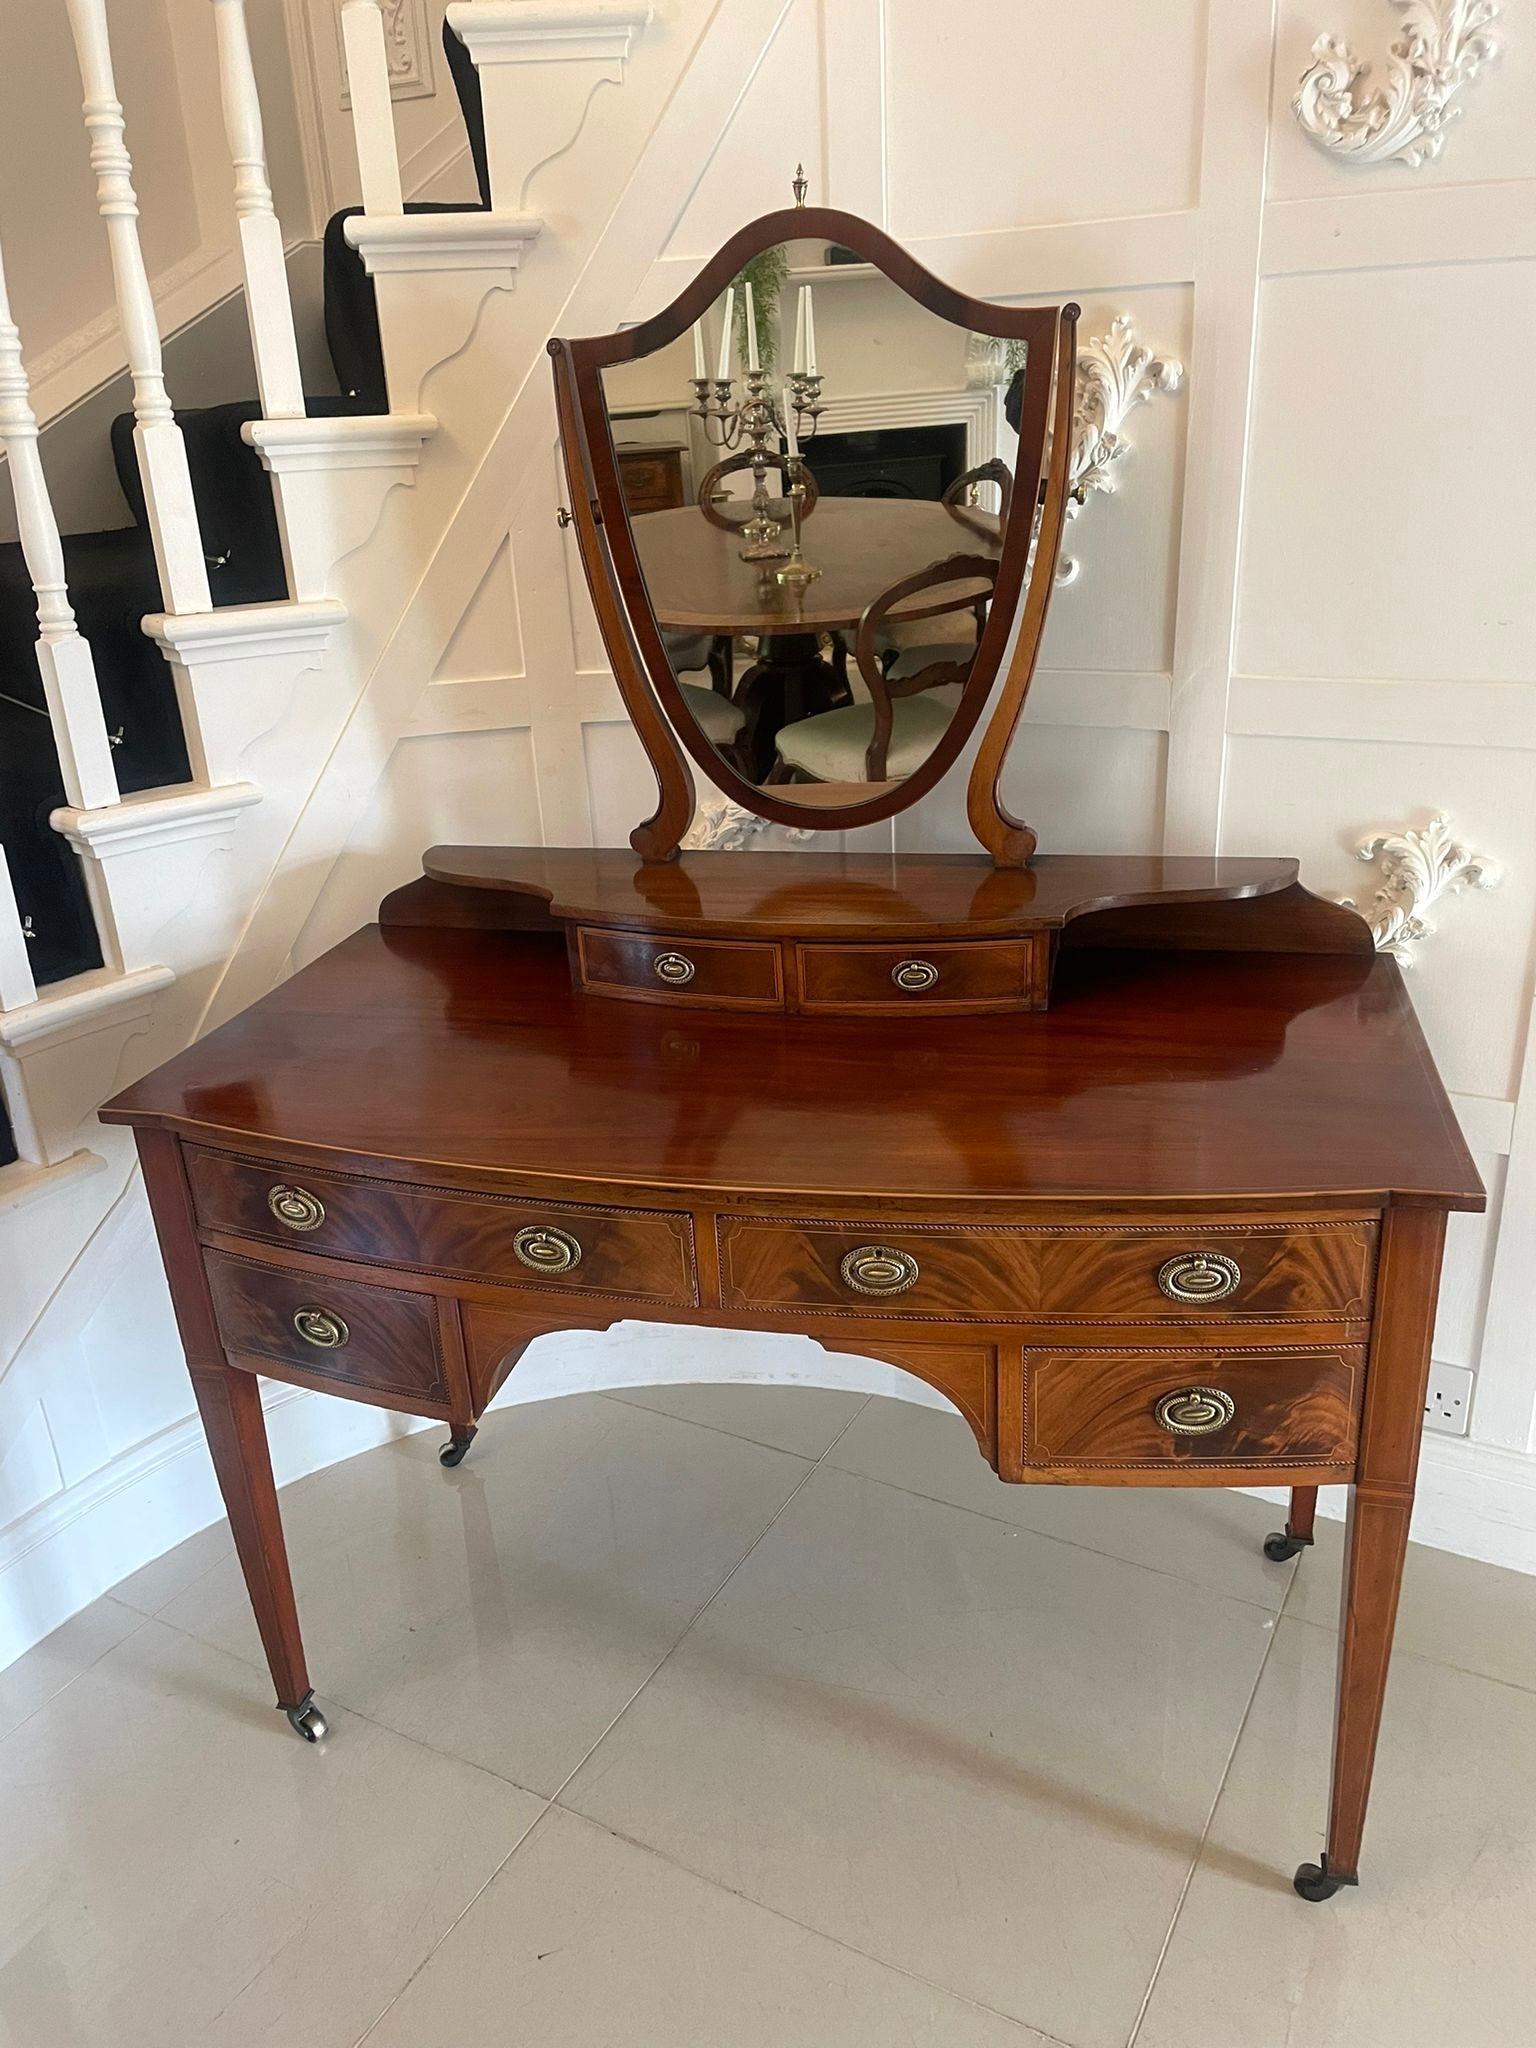 Antique Edwardian Quality Mahogany Inlaid Dressing Table by James Shoolbred 1